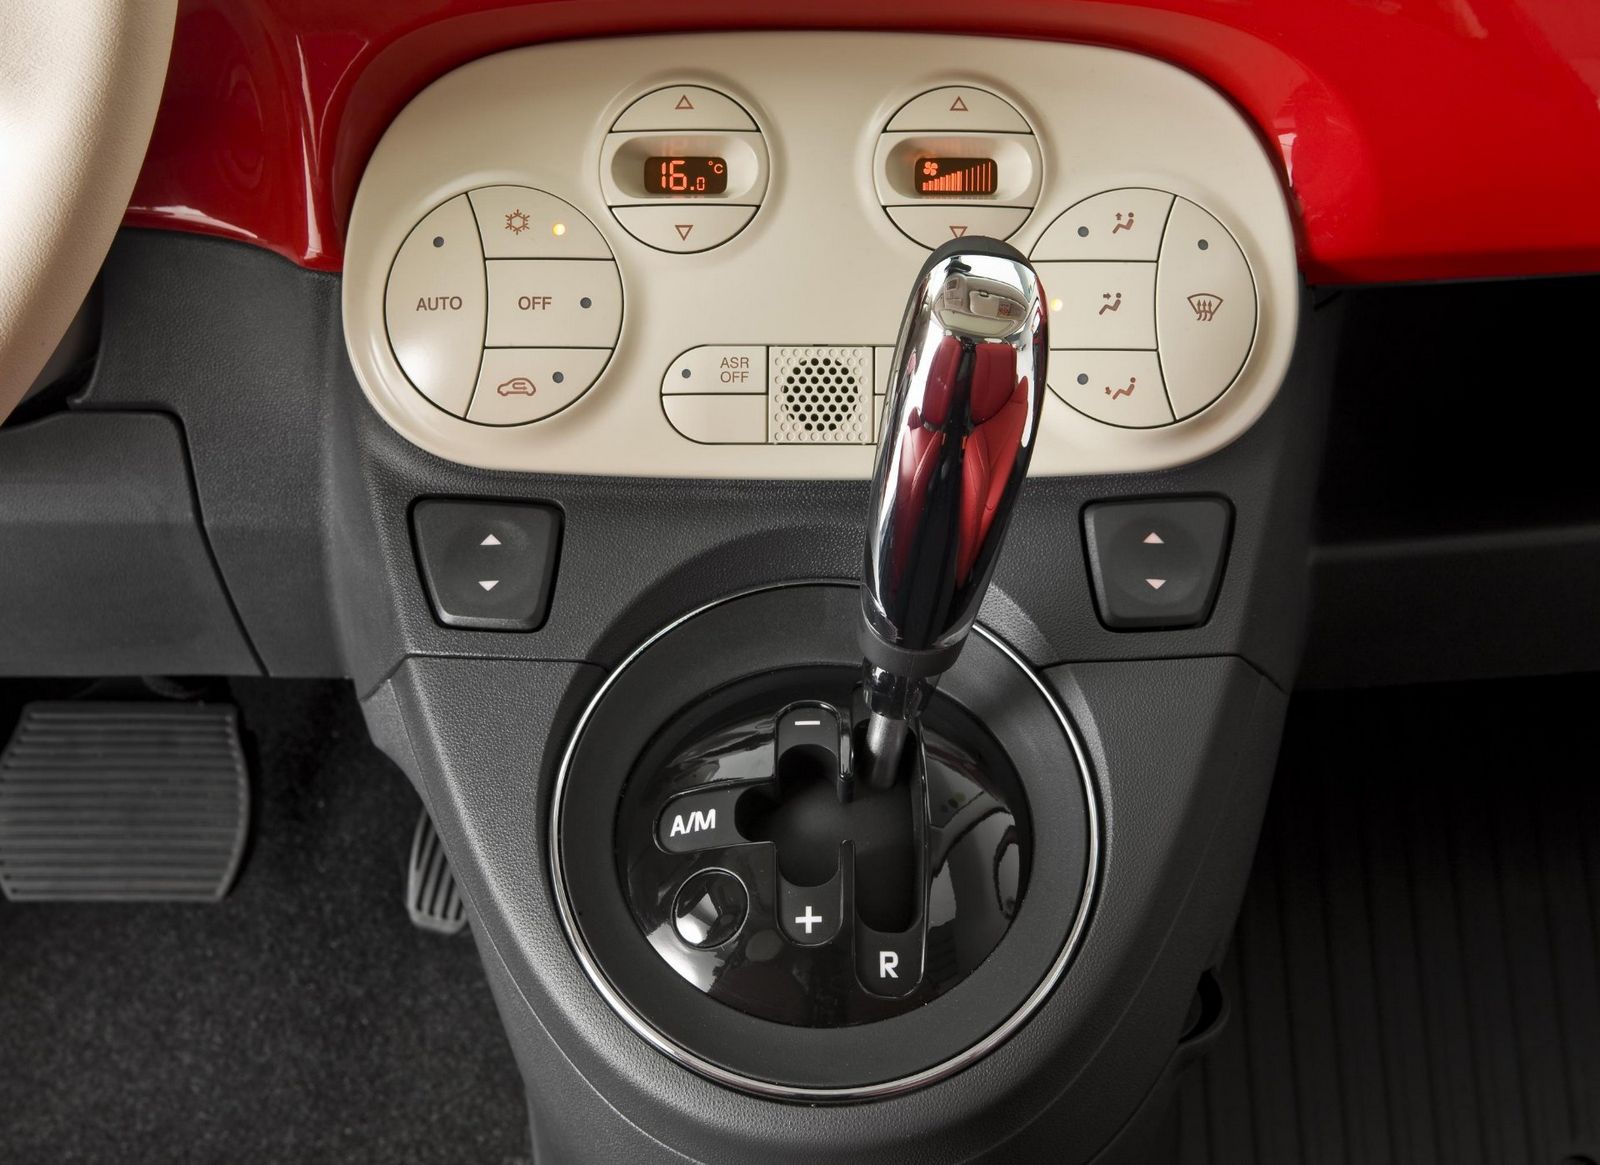 European Fiat 500 with manual